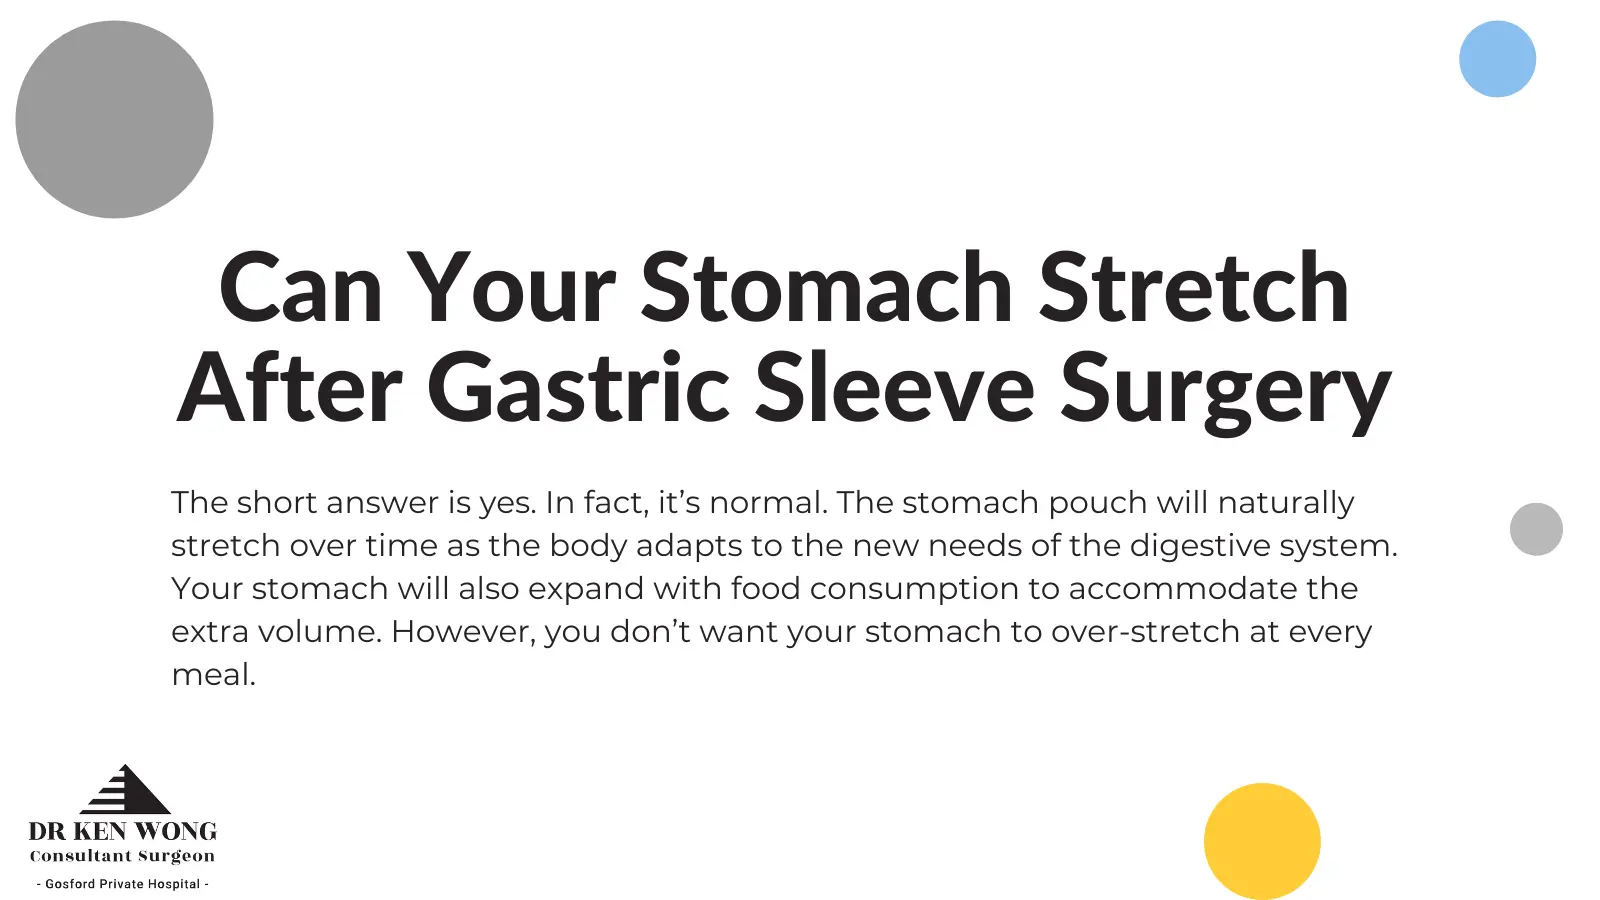 Can your stomach stretch after gastric sleeve